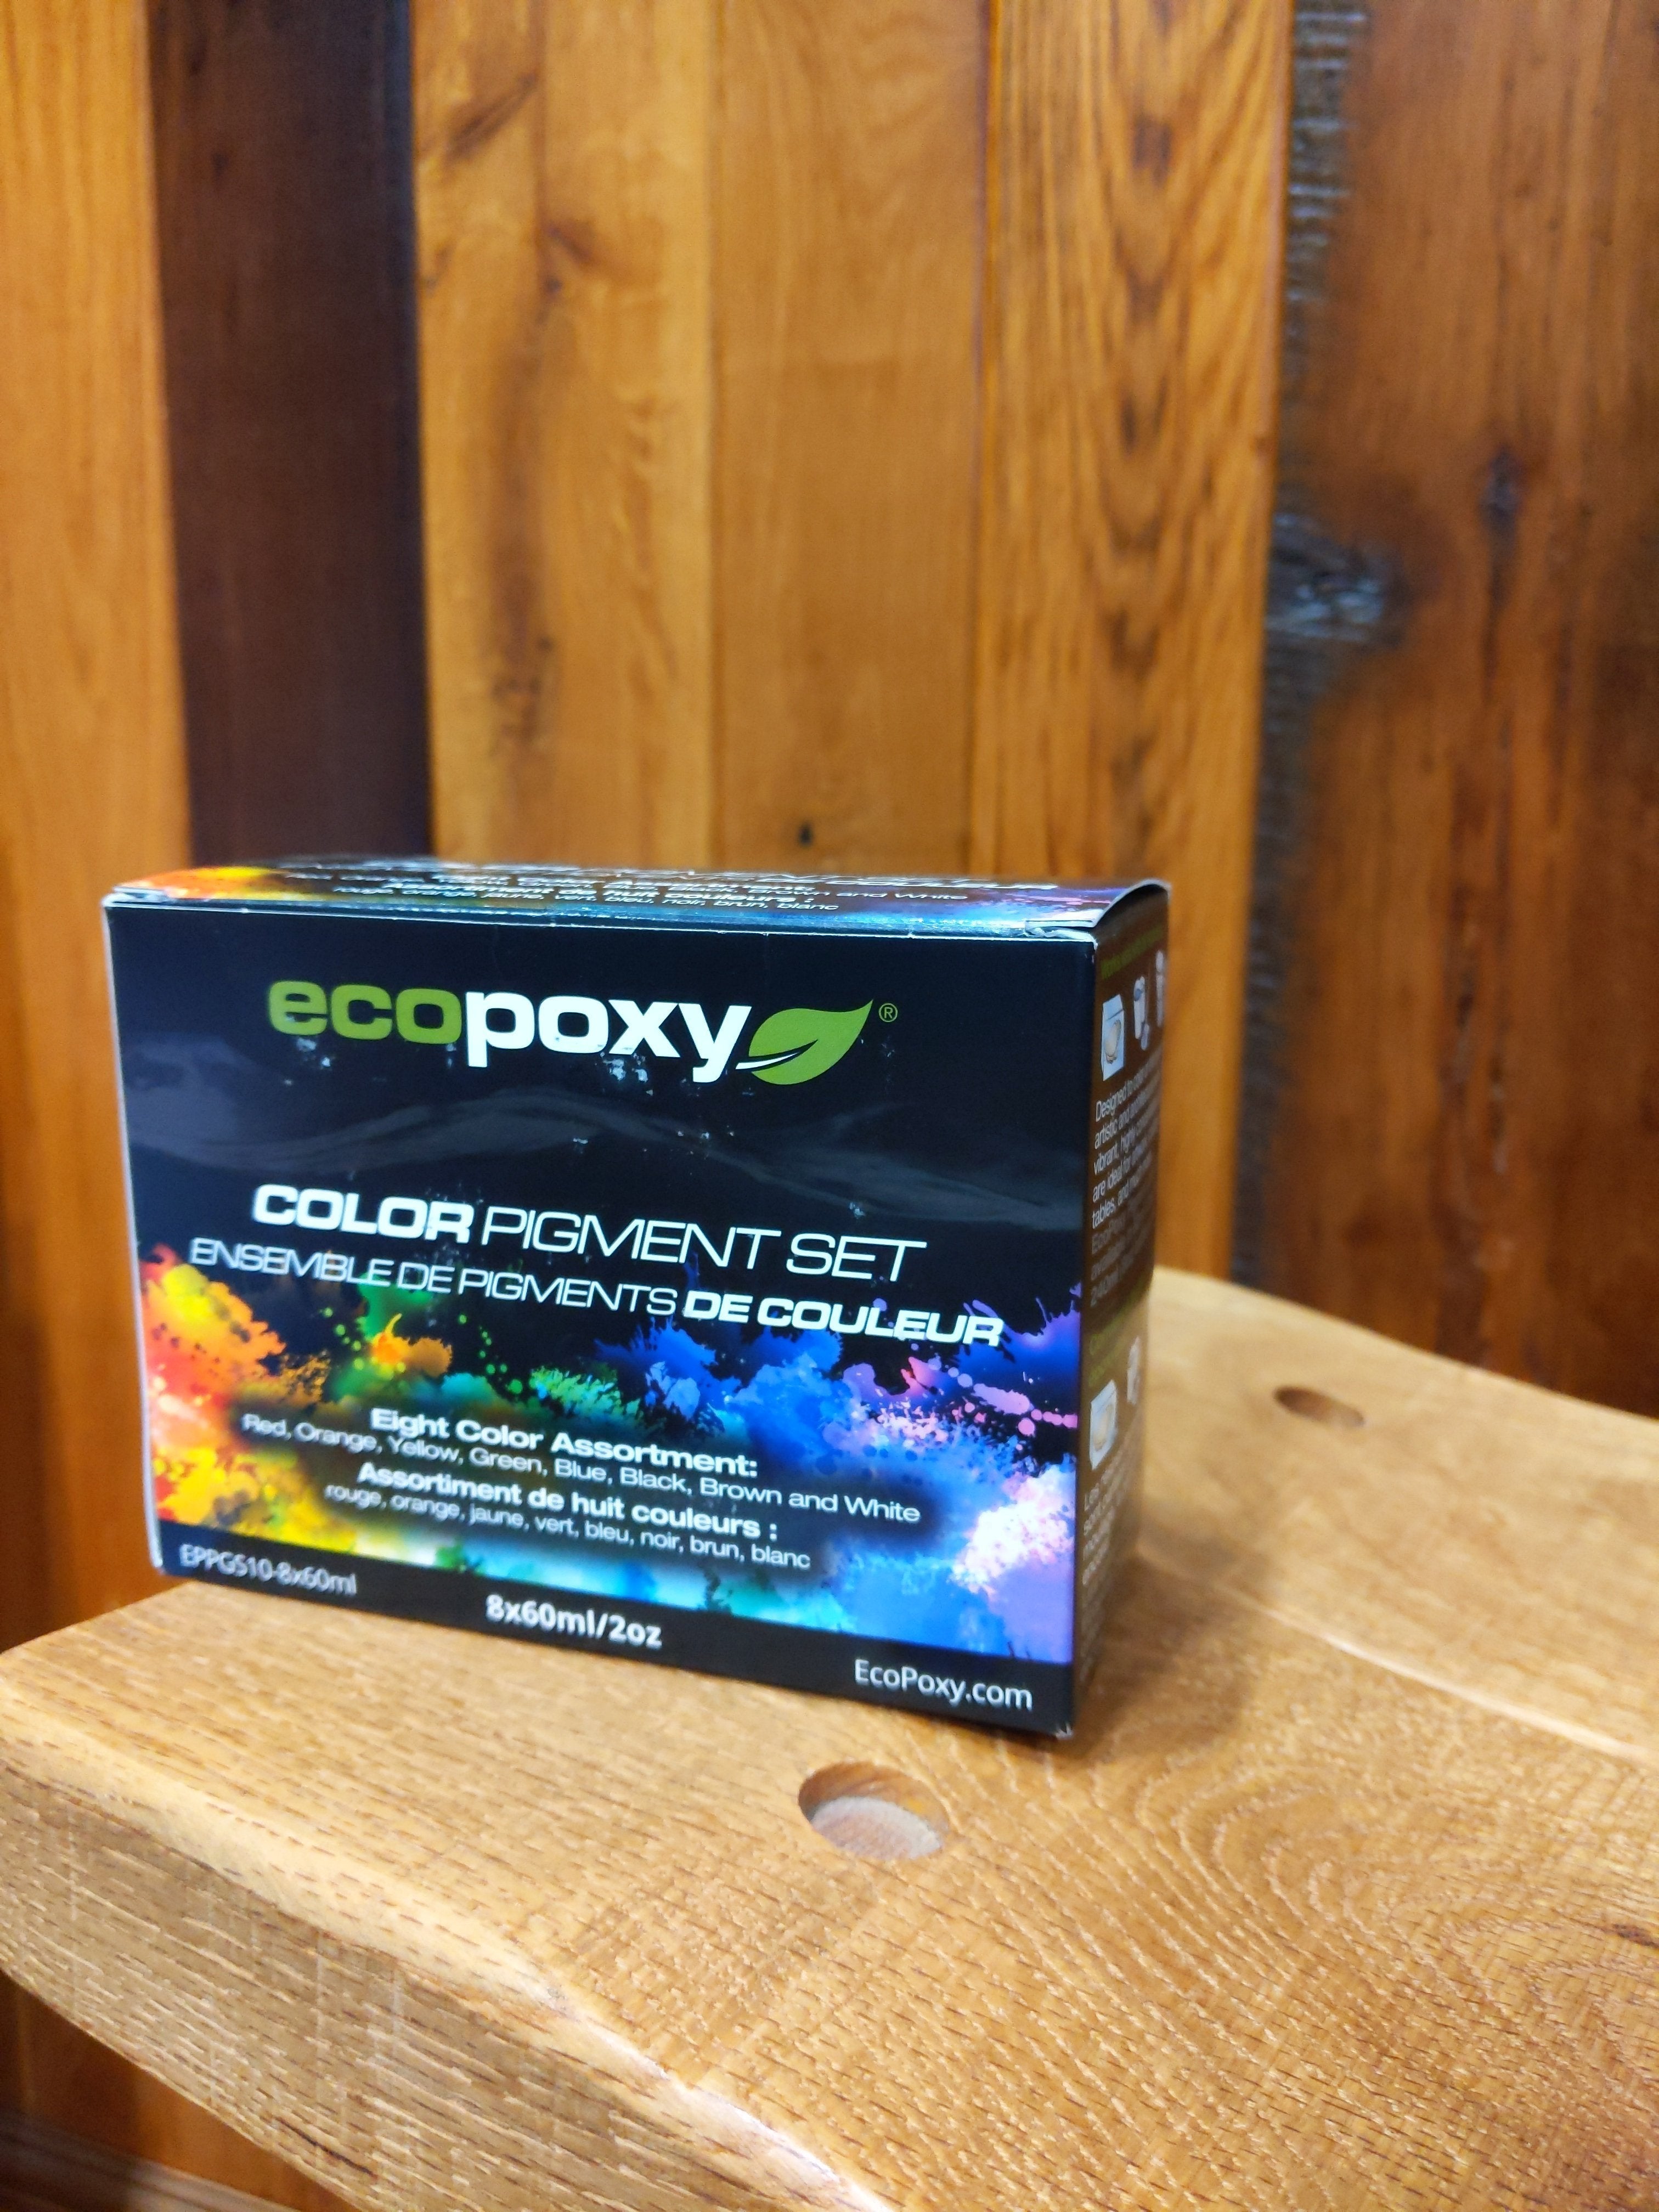 EcoPoxy Color Pigments – The Hardwood Mall